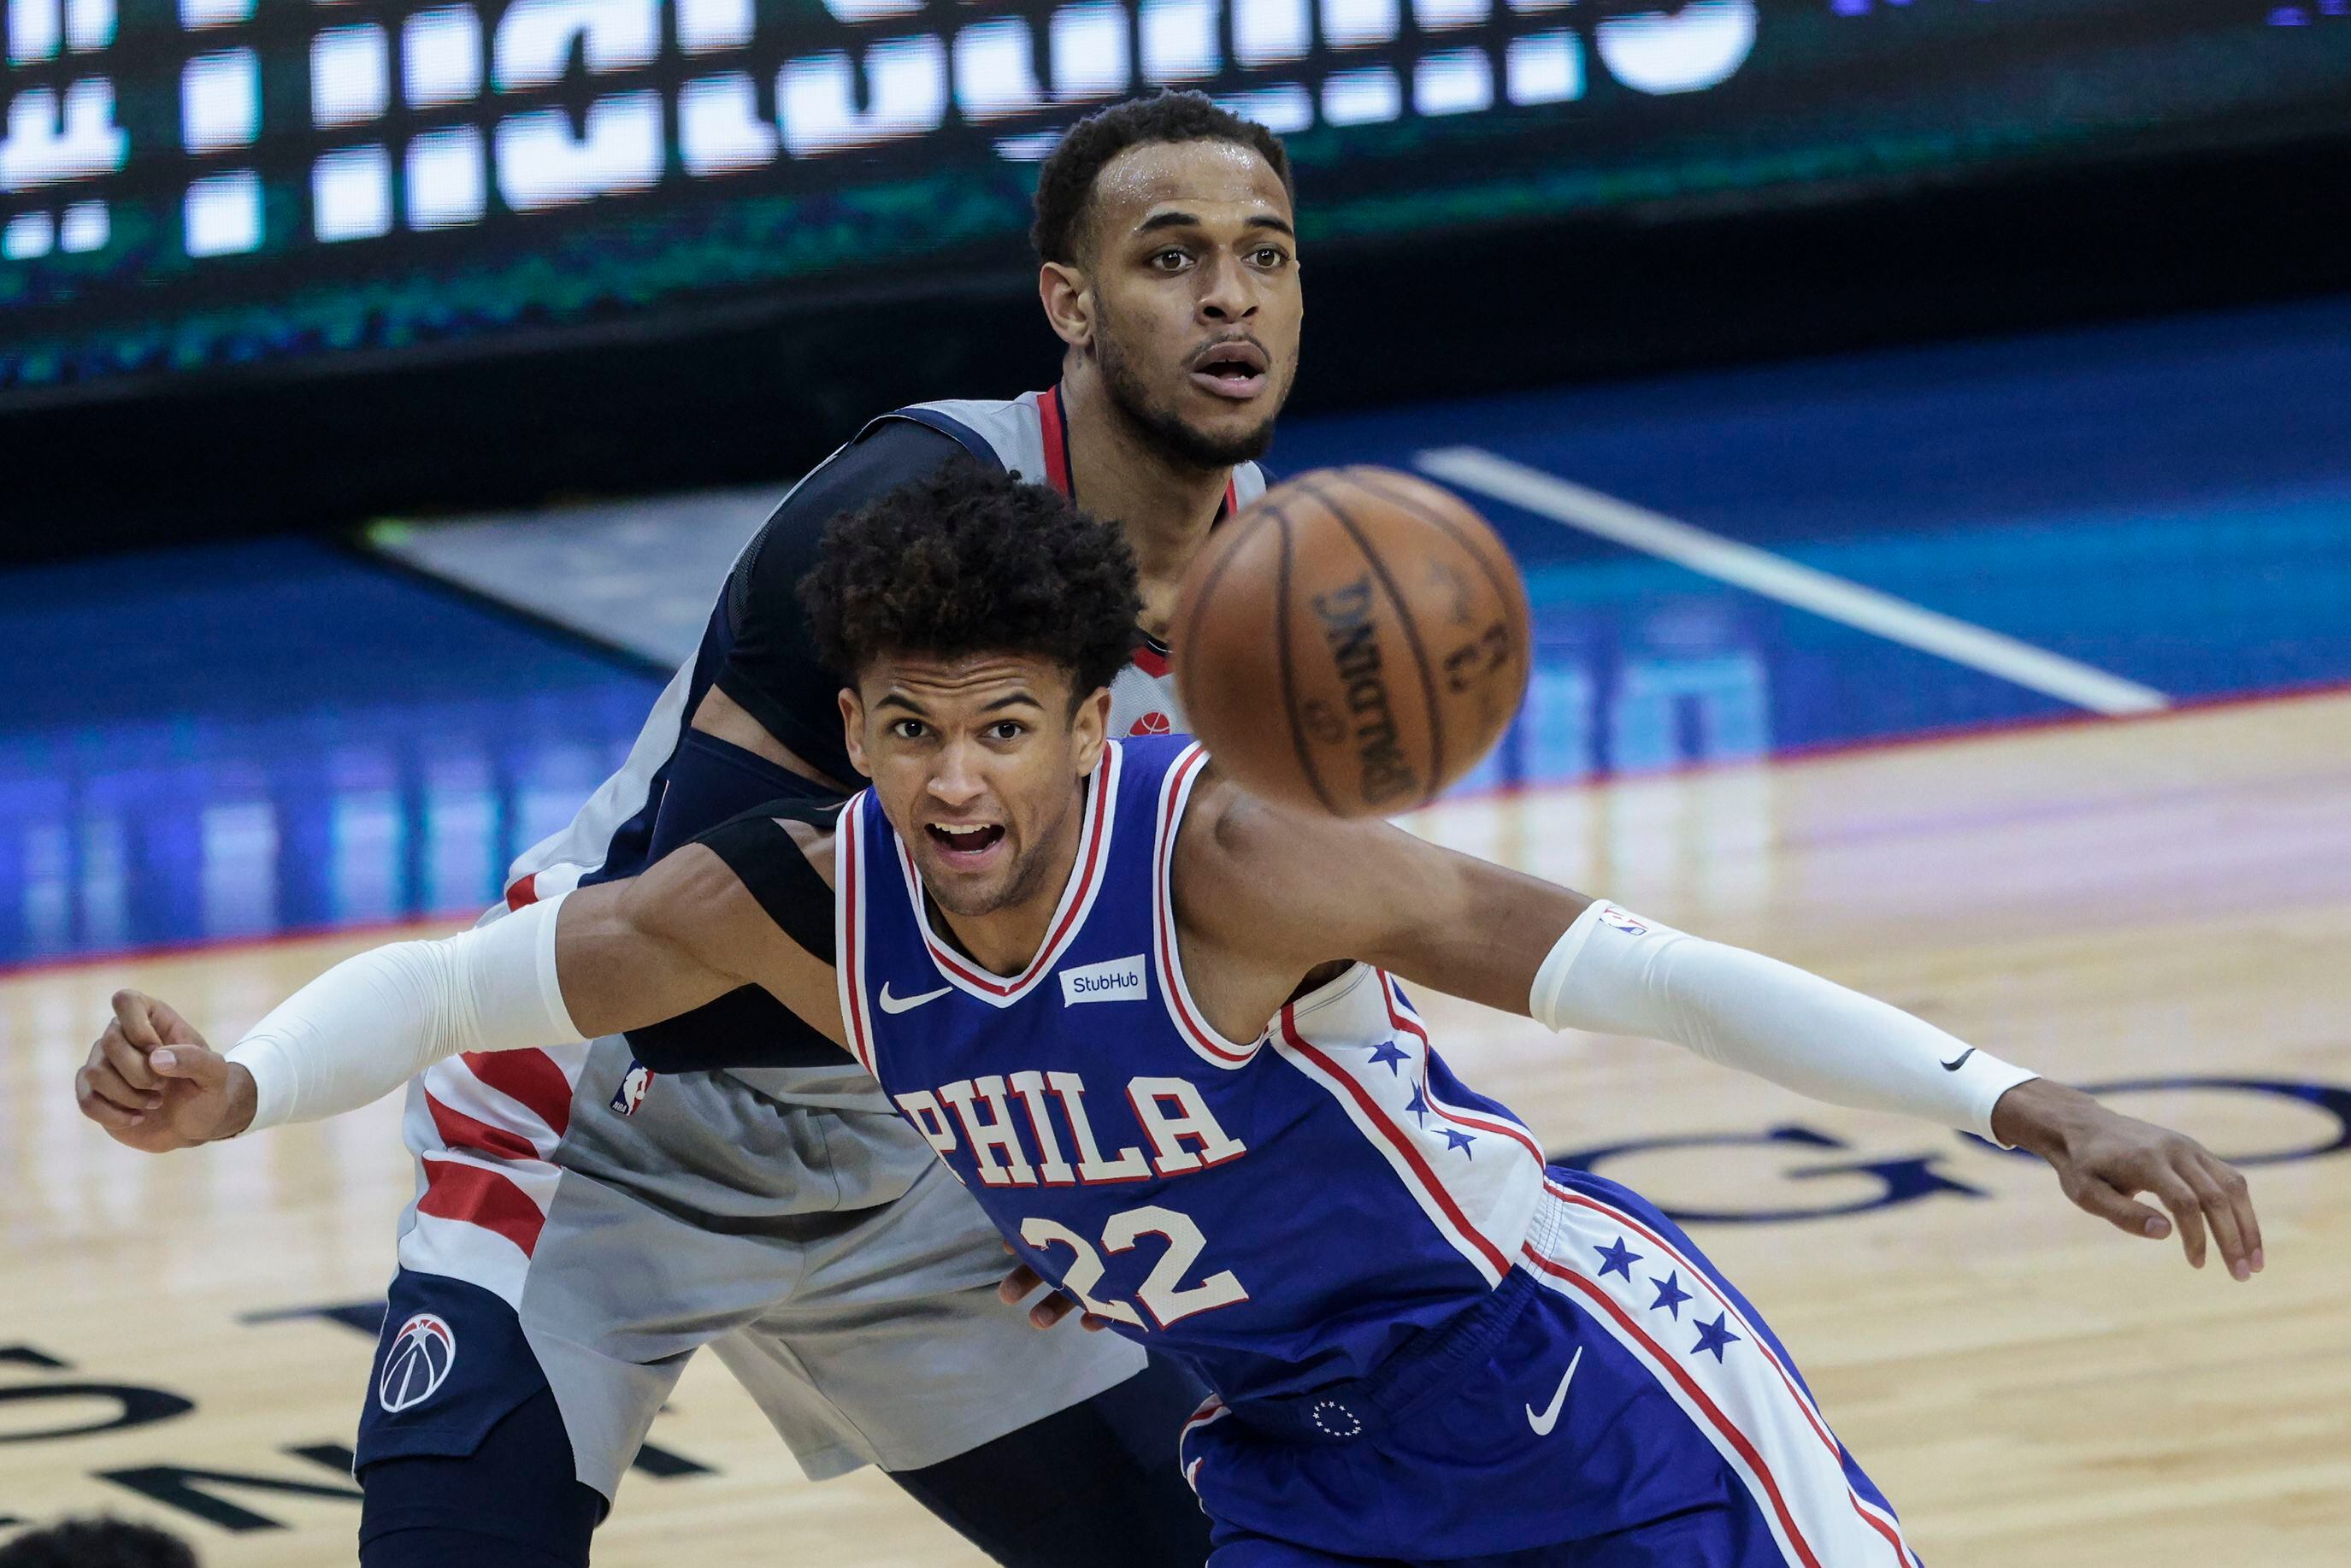 Game Review: The Wizards beat the Sixers Monday, but the Sixers really lost  to themselves - The Eagle